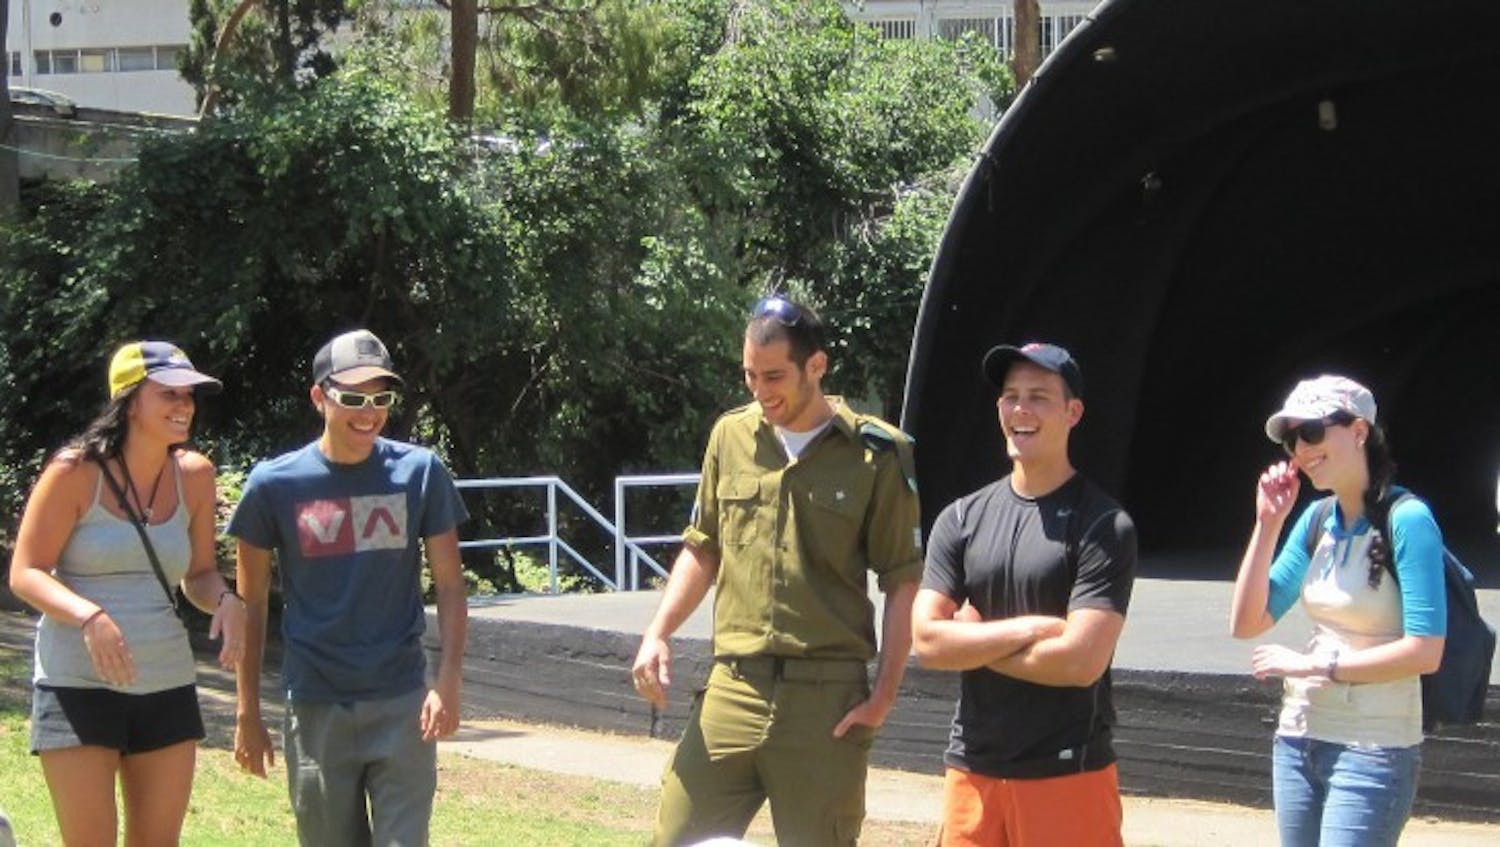 UF students on a Hillel Birthright trip meet the Israeli soldier who will accompany them during their trip.